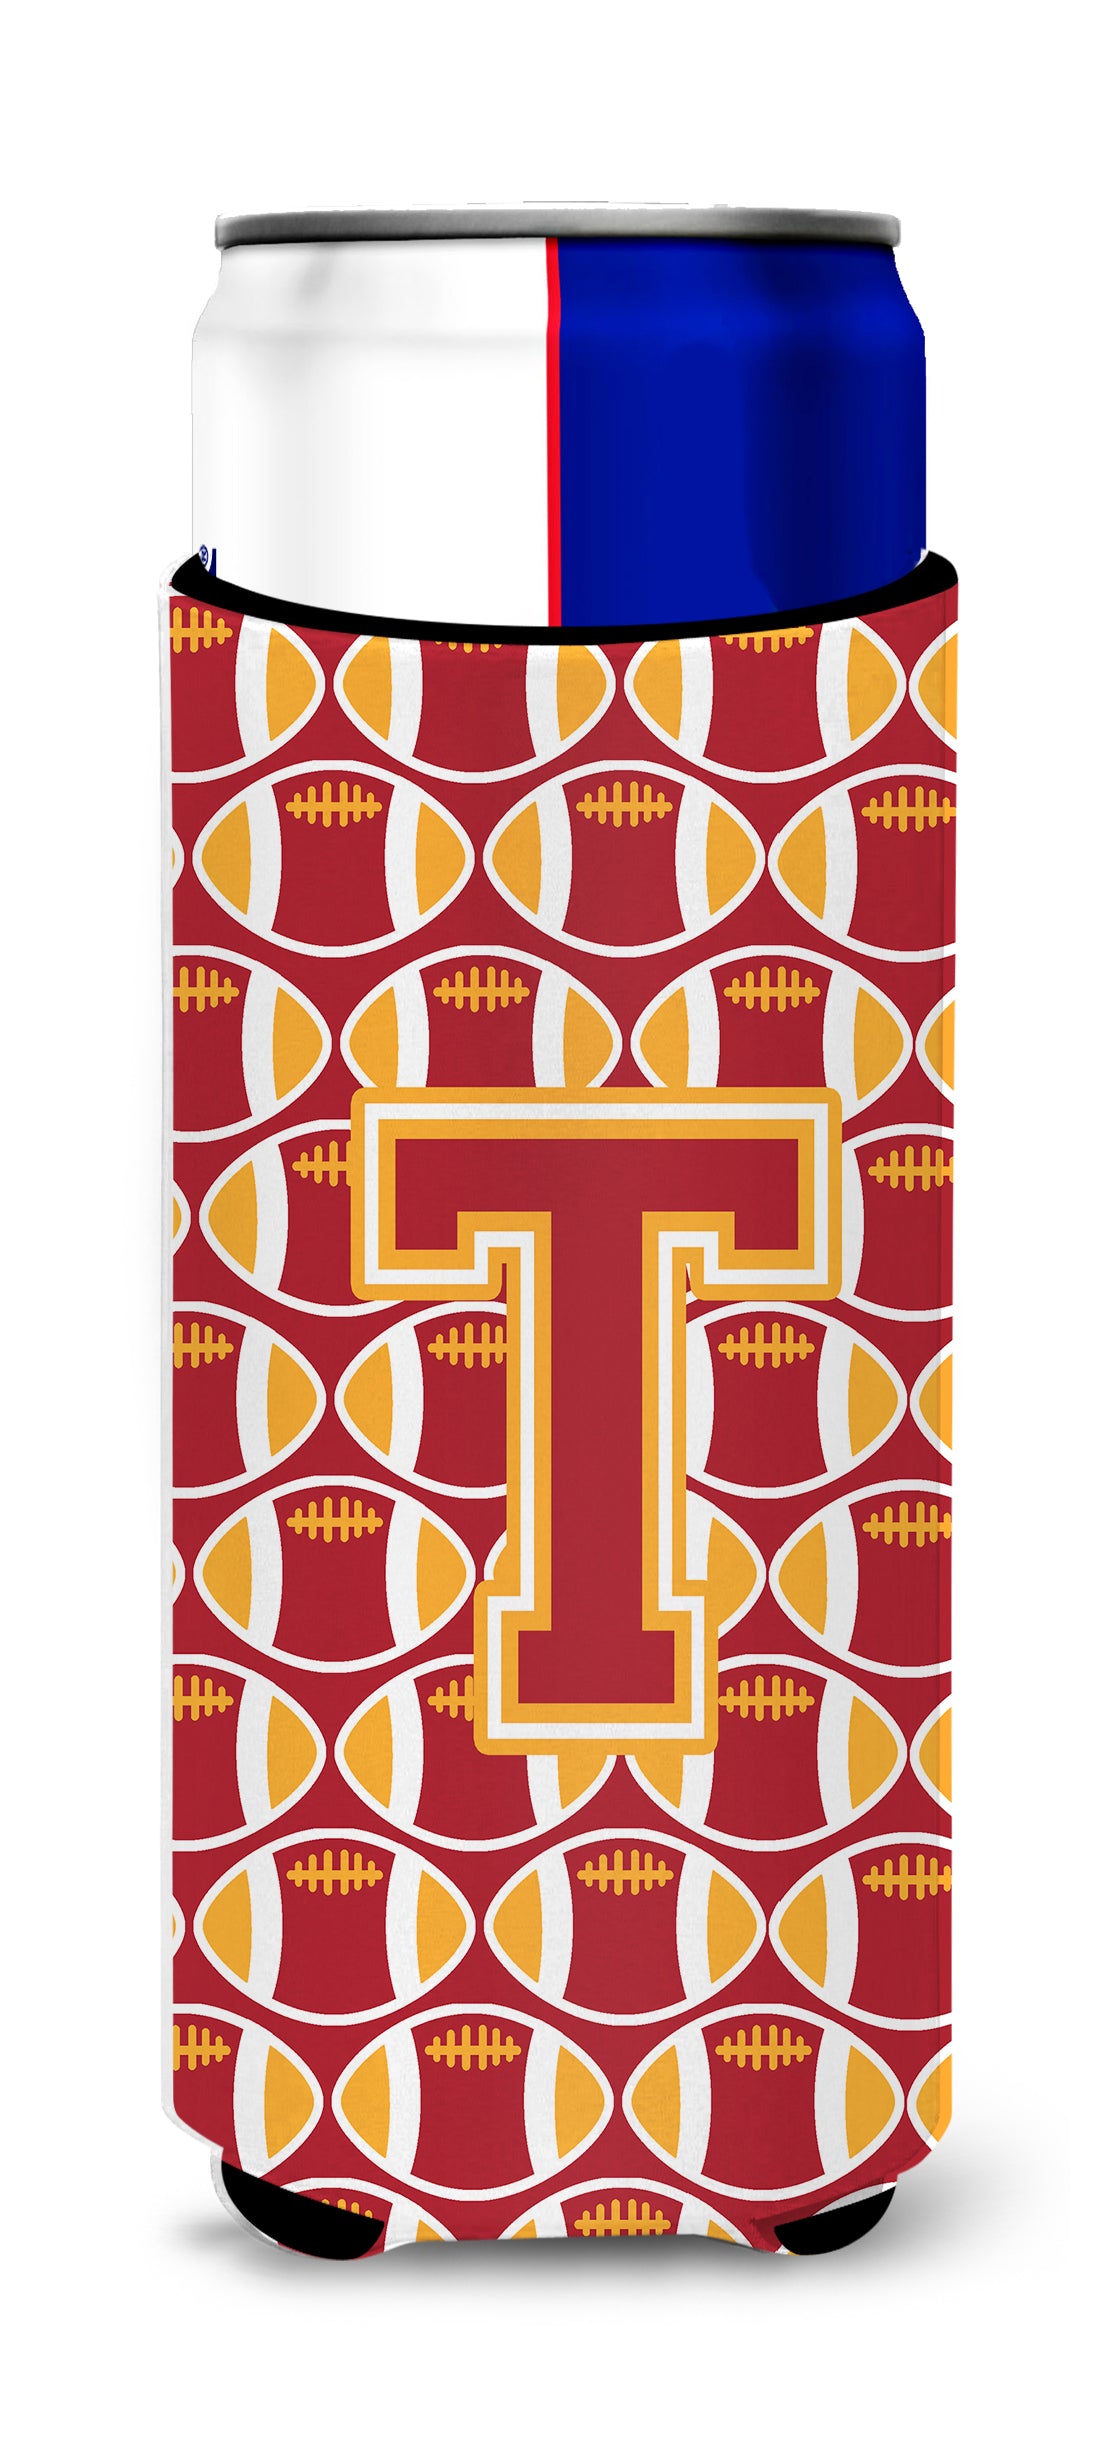 Letter T Football Cardinal and Gold Ultra Beverage Insulators for slim cans CJ1070-TMUK